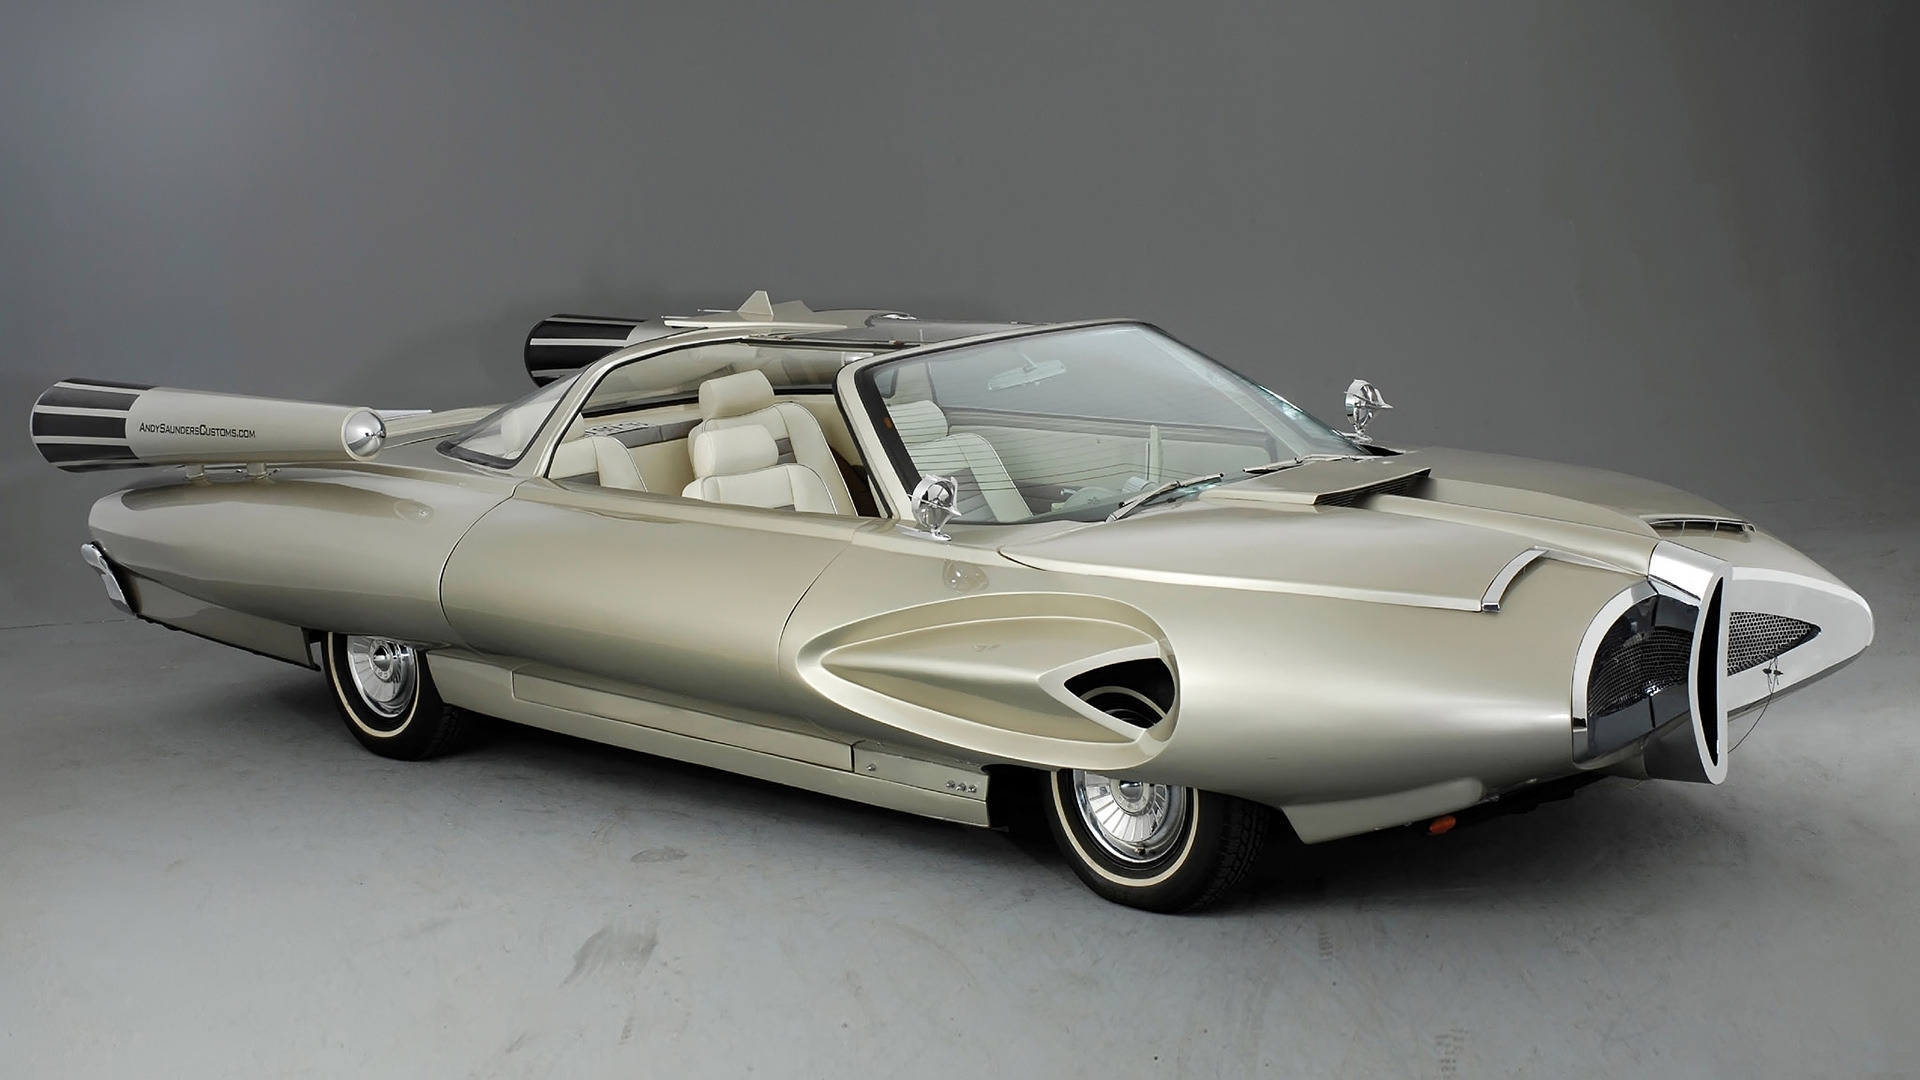 Ford X 2000 Concept Car 1958 for 1920 x 1080 HDTV 1080p resolution